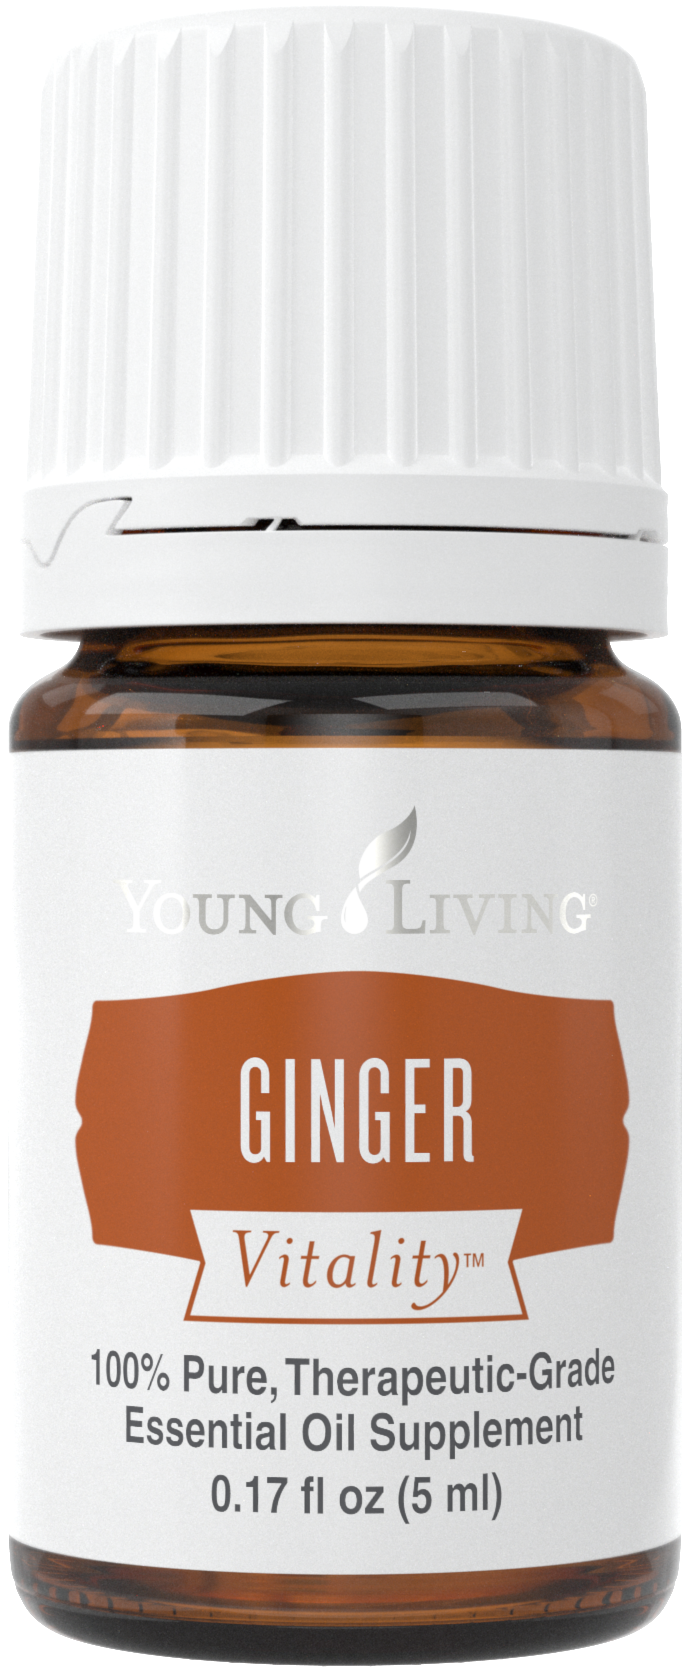 Ginger Vitality Silo.png